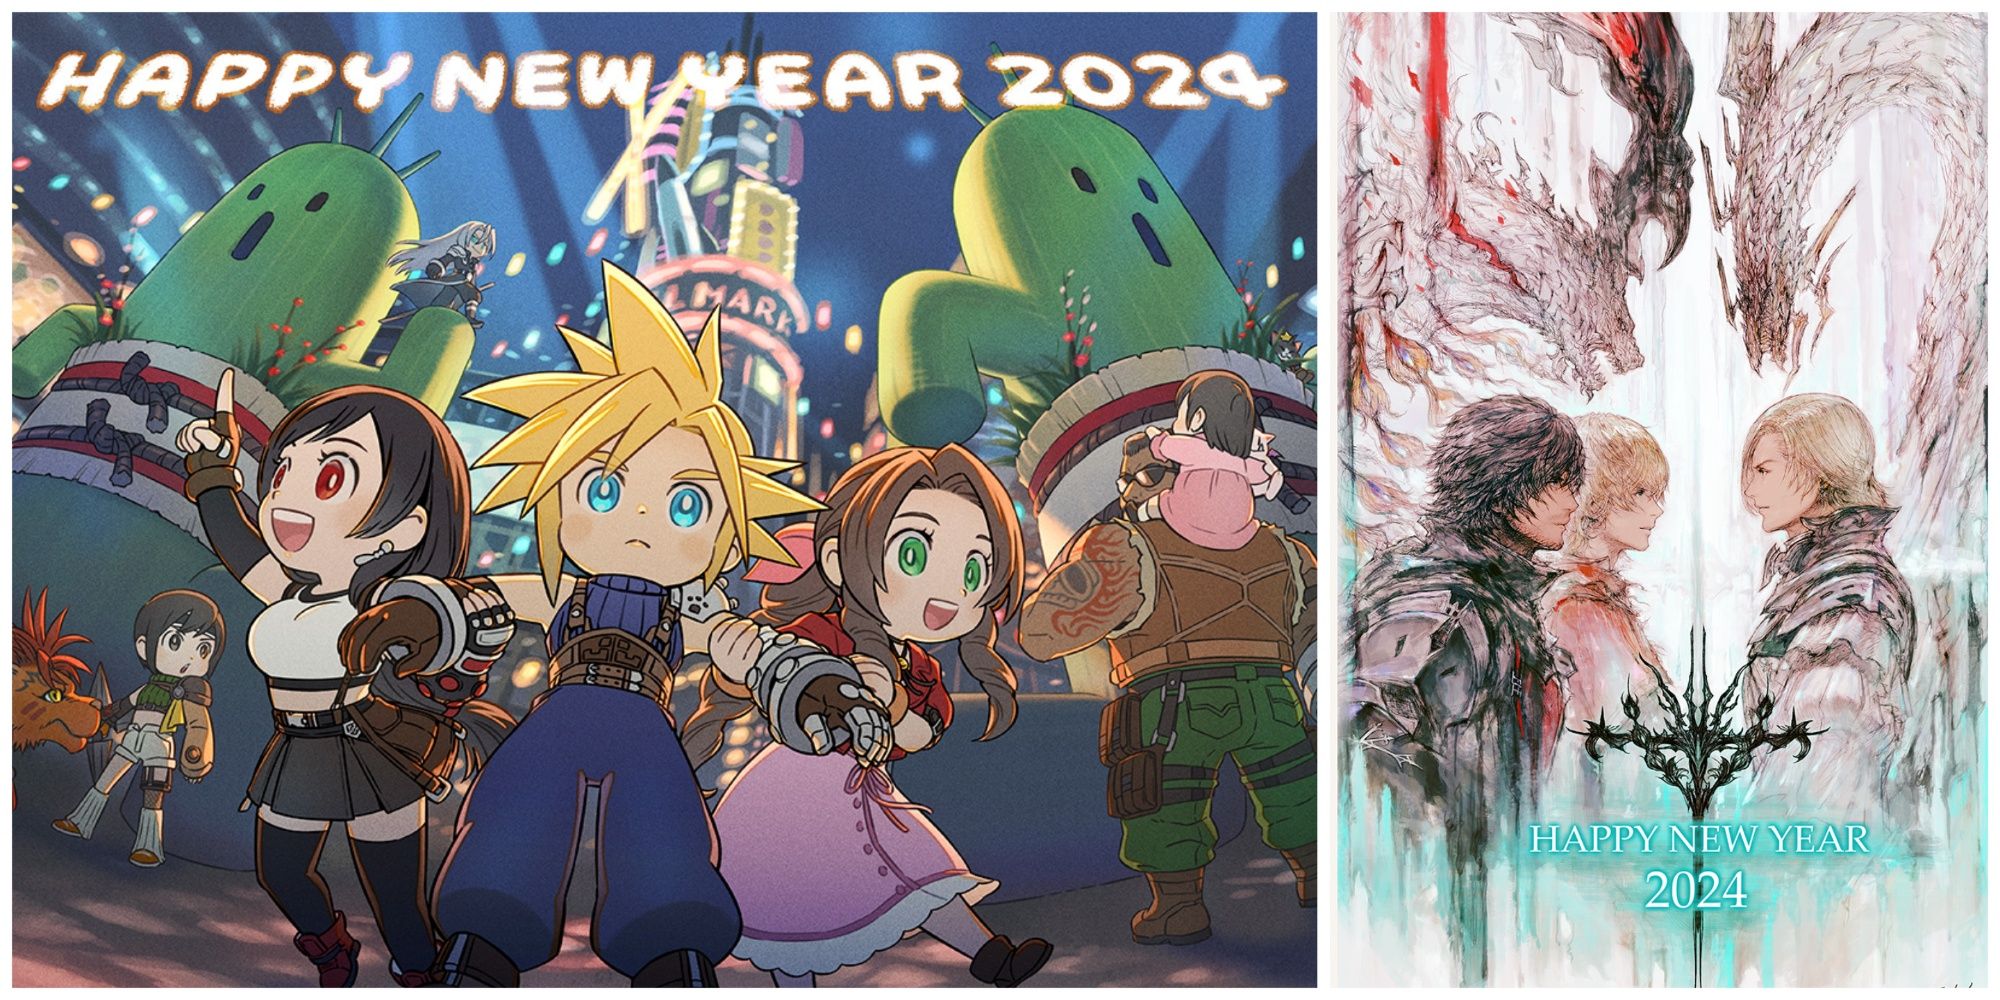 Final Fantasy New Year's 2024 collage